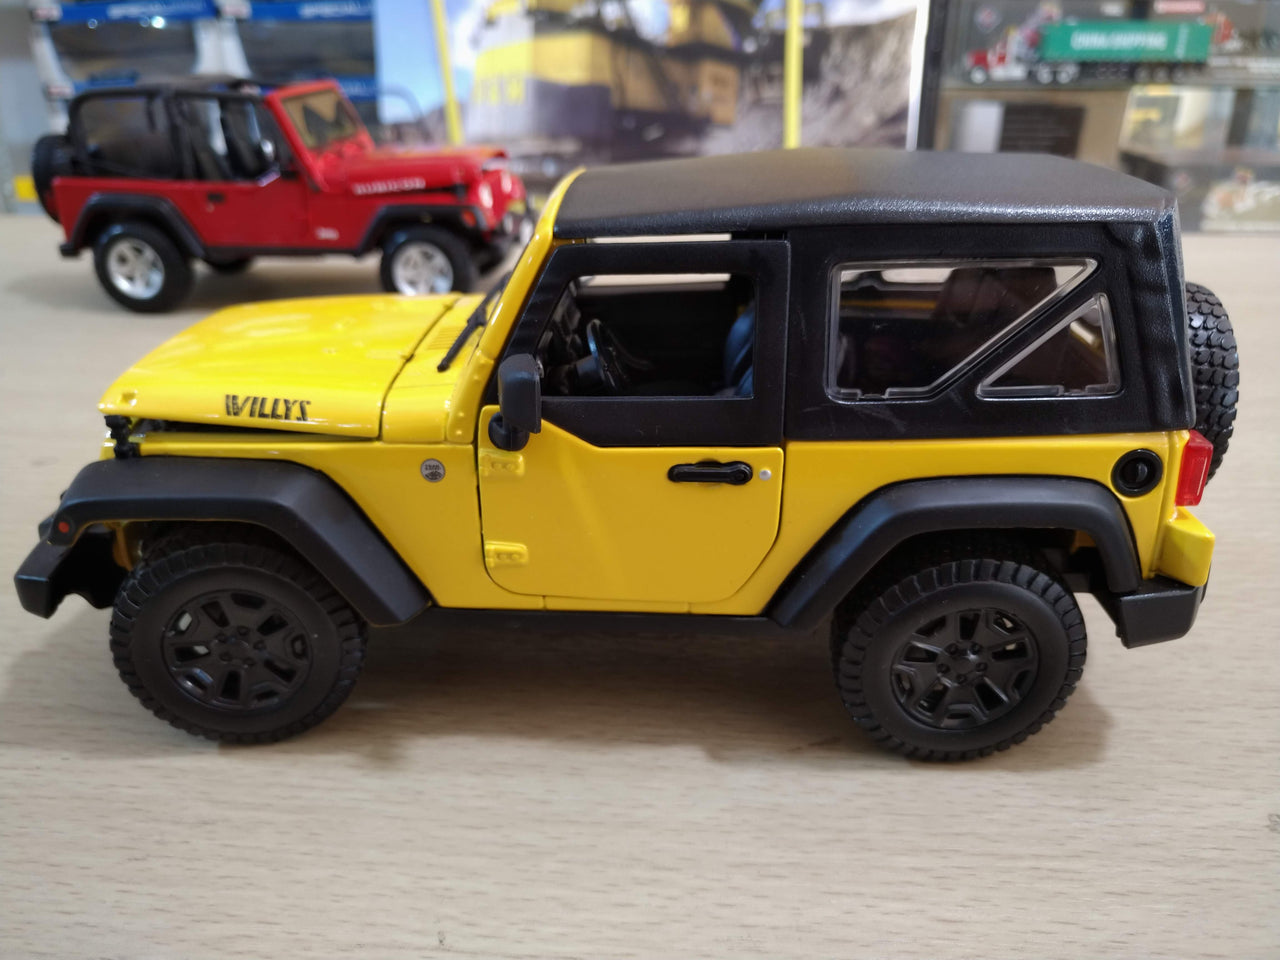 31676 Jeep Wrangler Year 2014 Scale 1:18 (Maisto Special Edition)